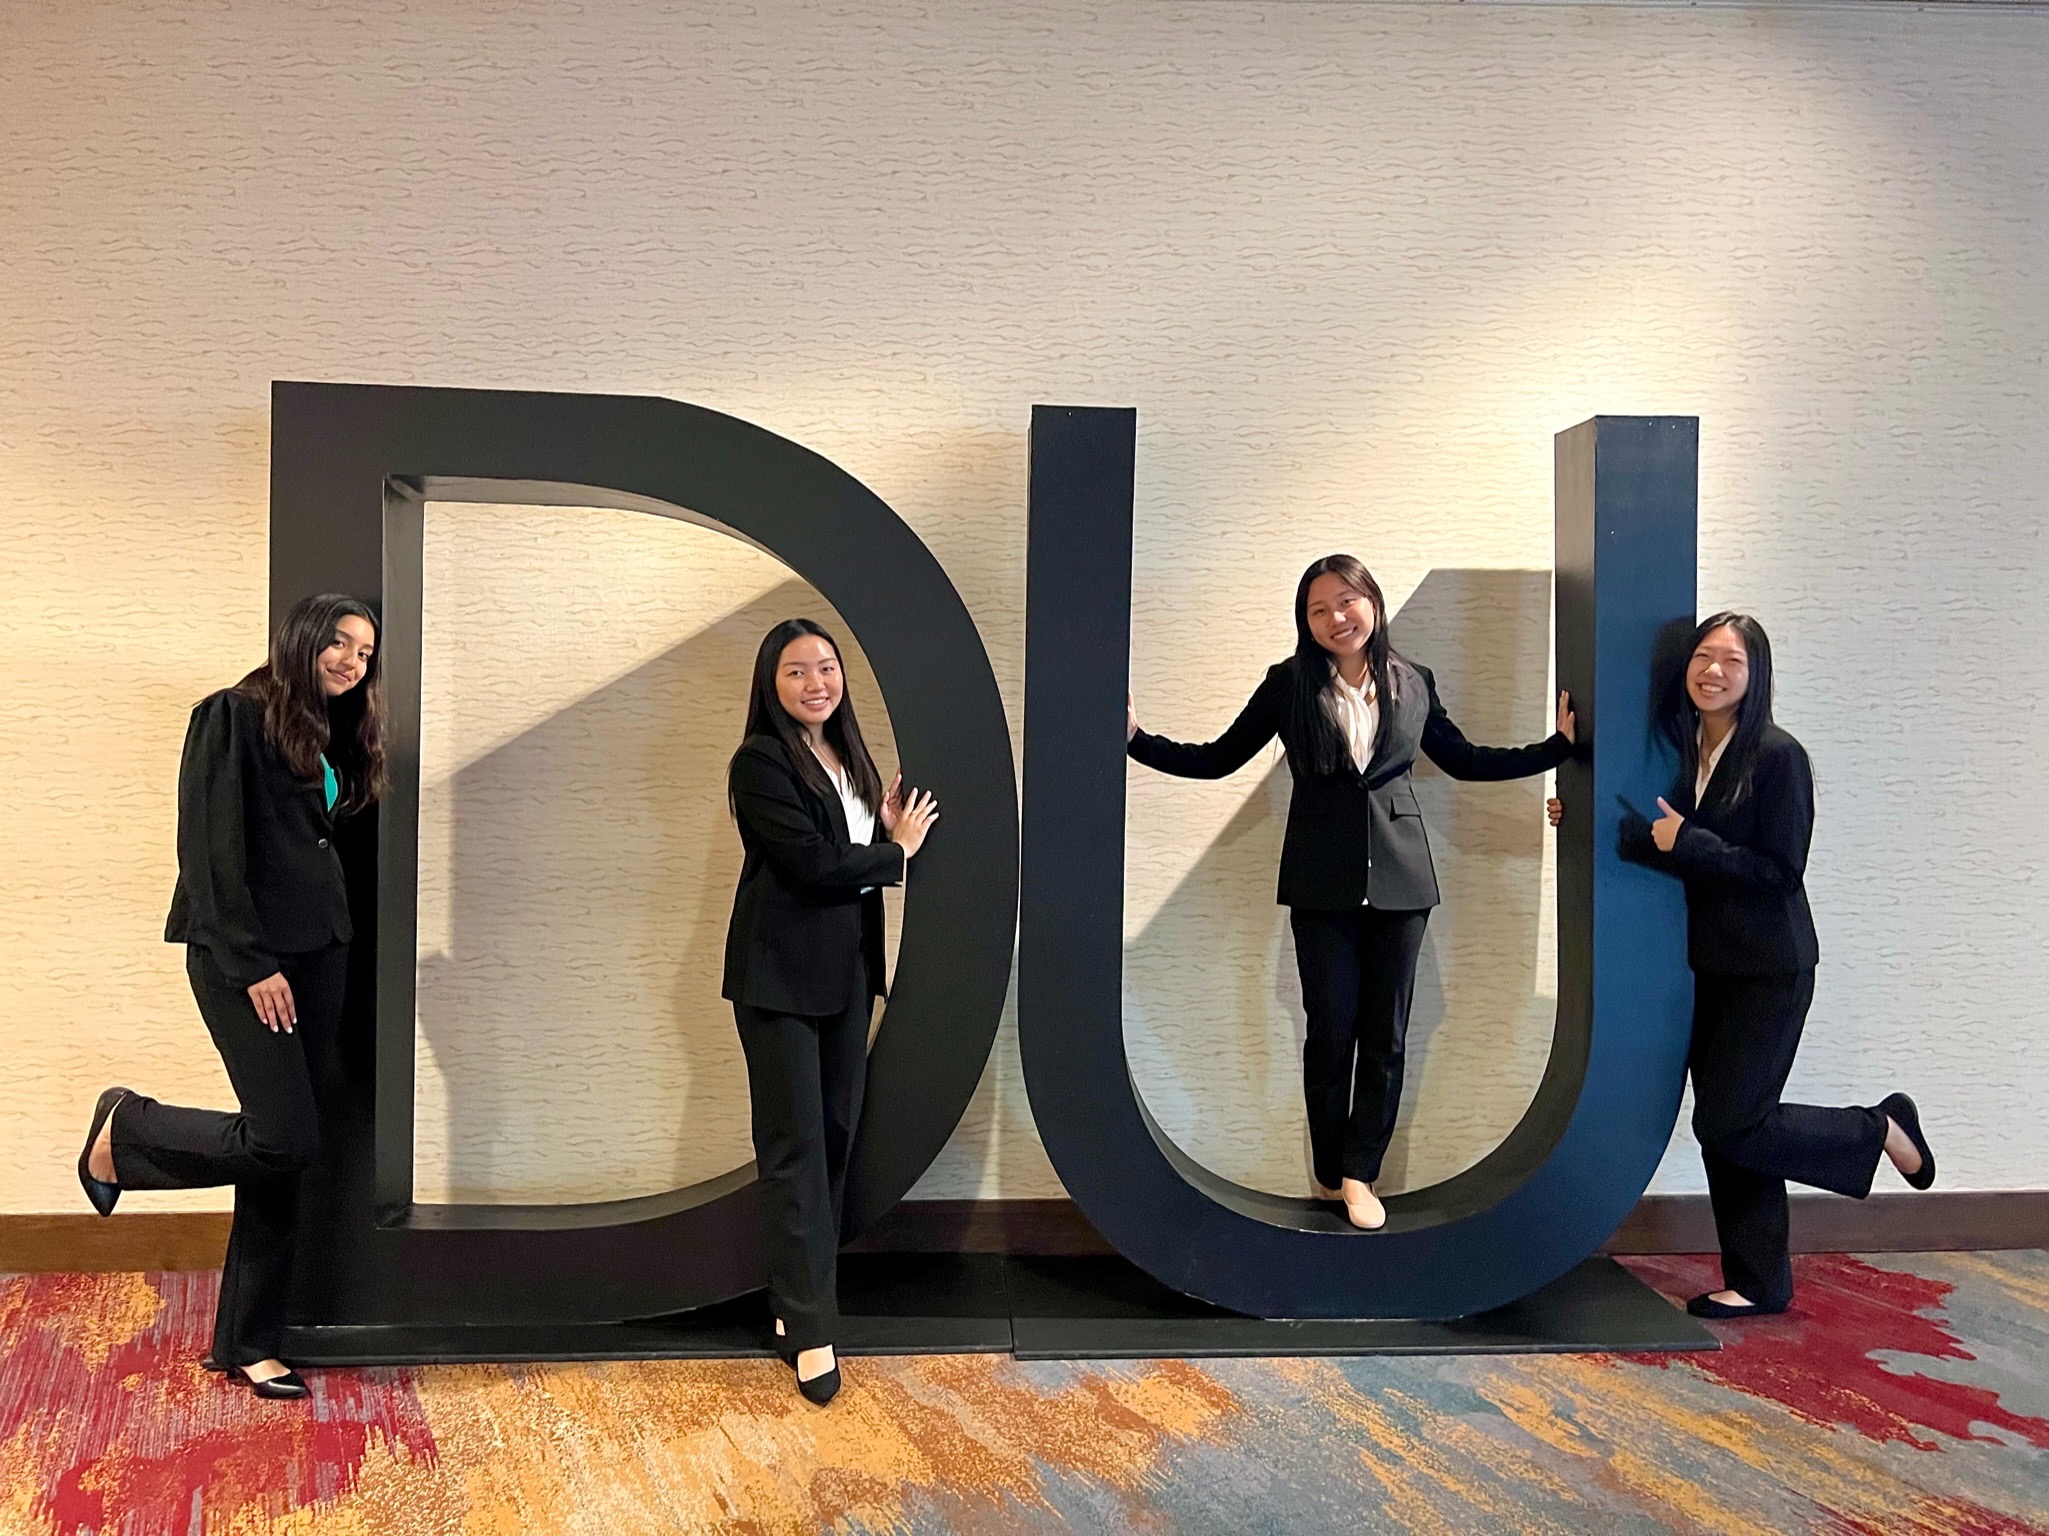 IBH team wins third place at Deloitte’s National Undergraduate Case